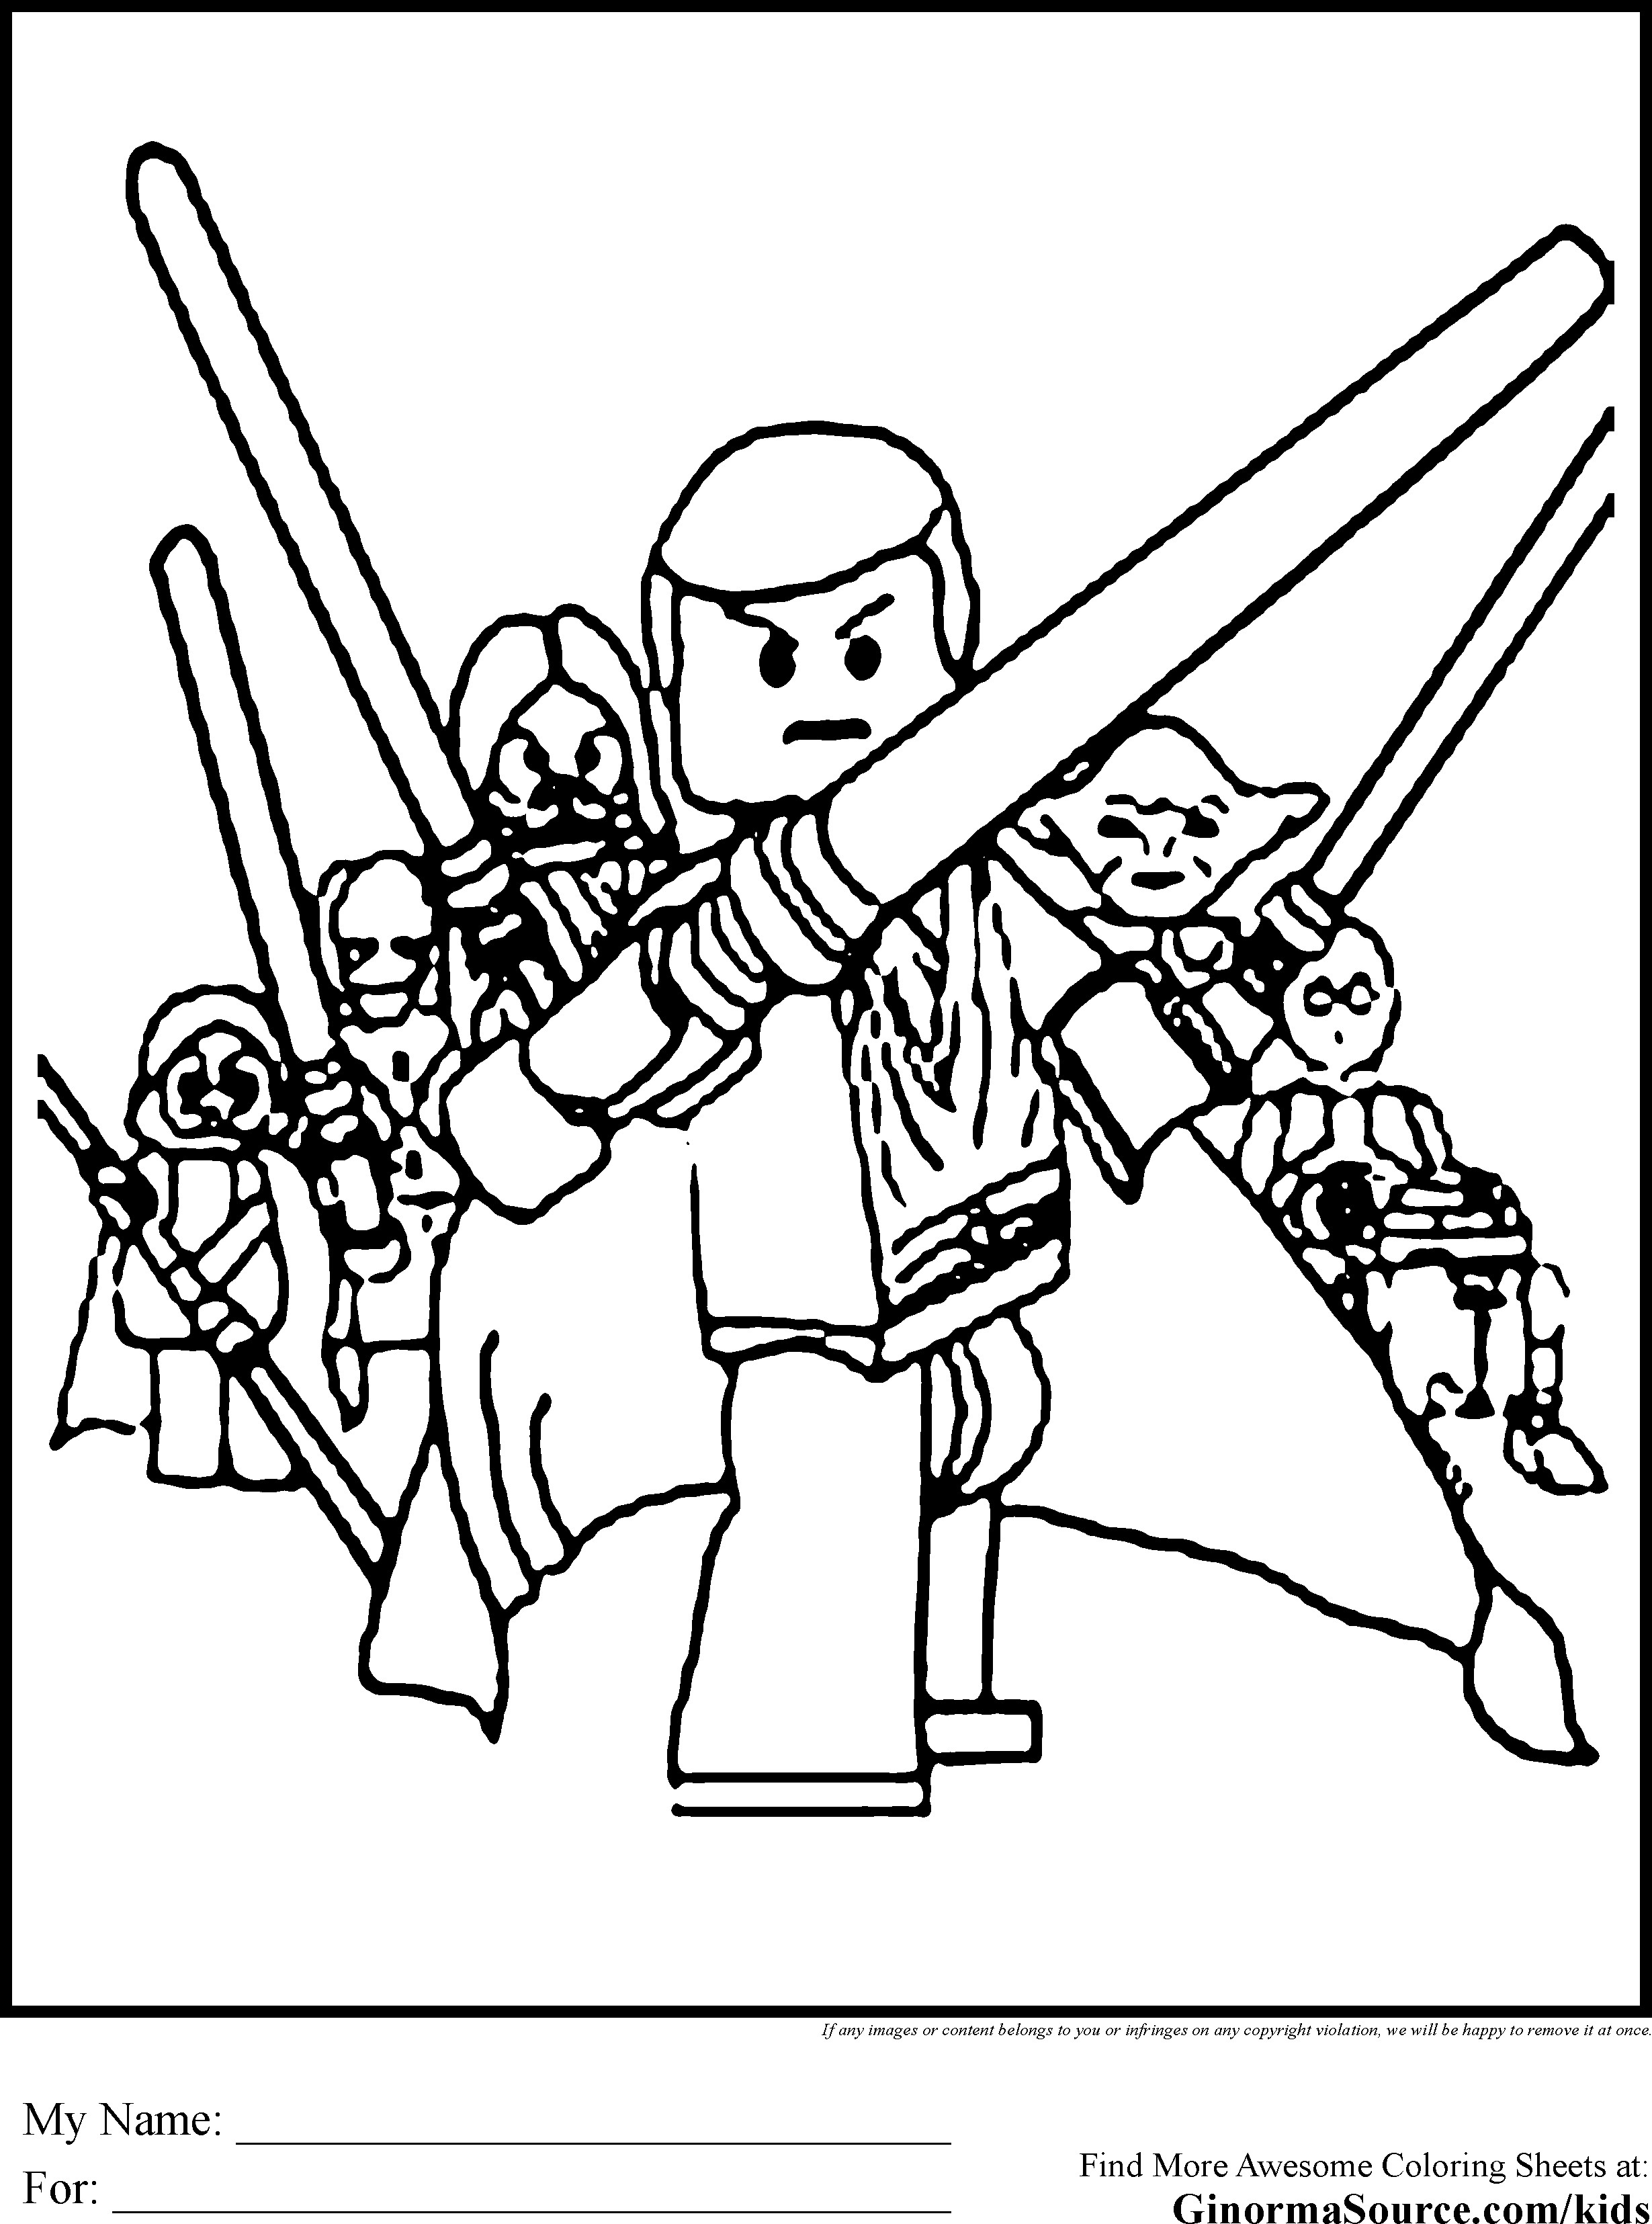 Lego Coloring Pages Star Wars Lego Star Wars Coloring Page Printable For Snazzy Pages Template